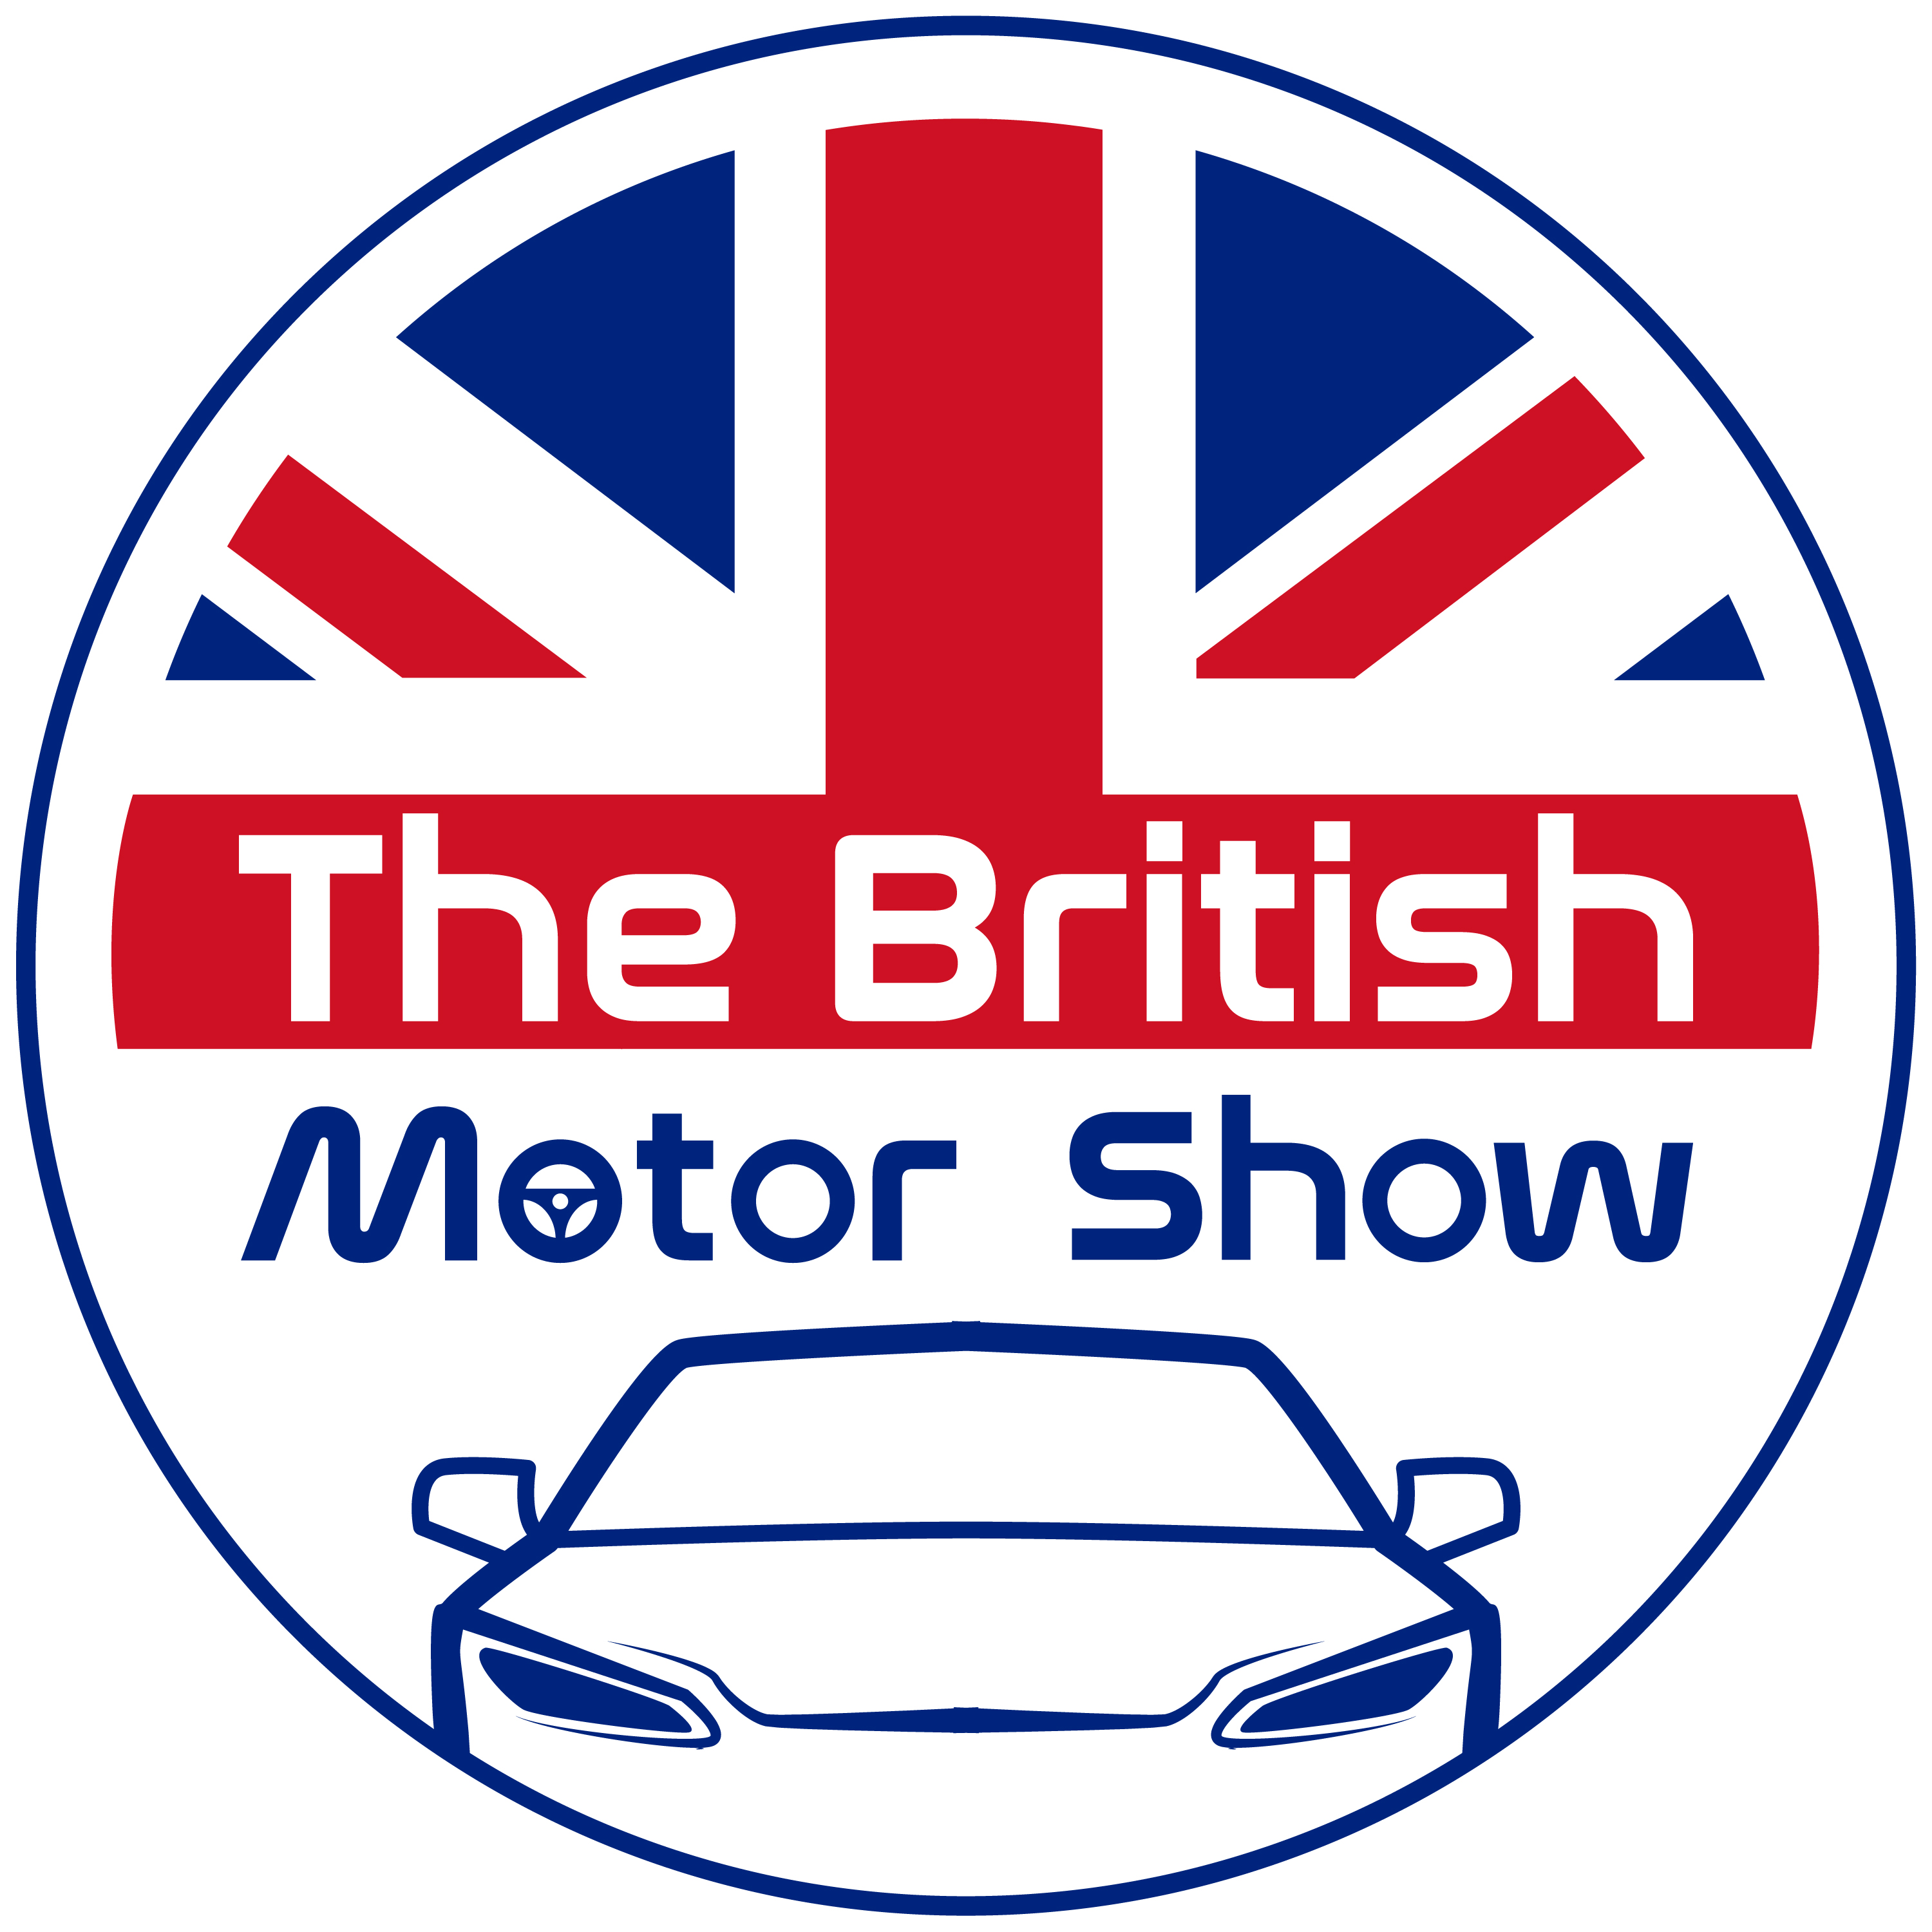 The British Motor Show arrives in Farnborough this summer